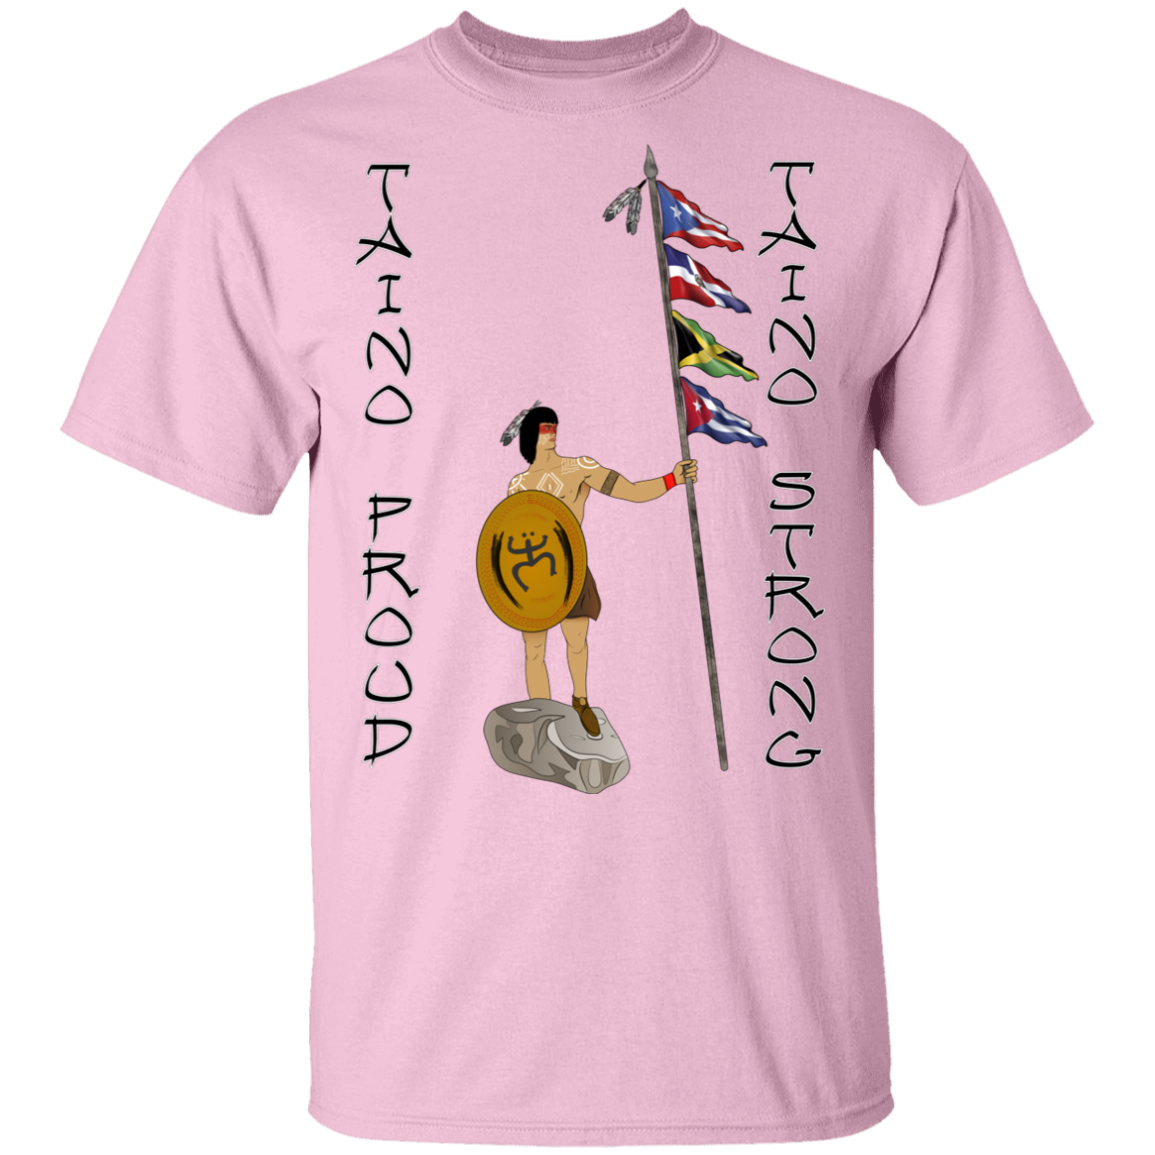 Taino Proud and Strong 5.3 oz. T-Shirt - Puerto Rican Pride